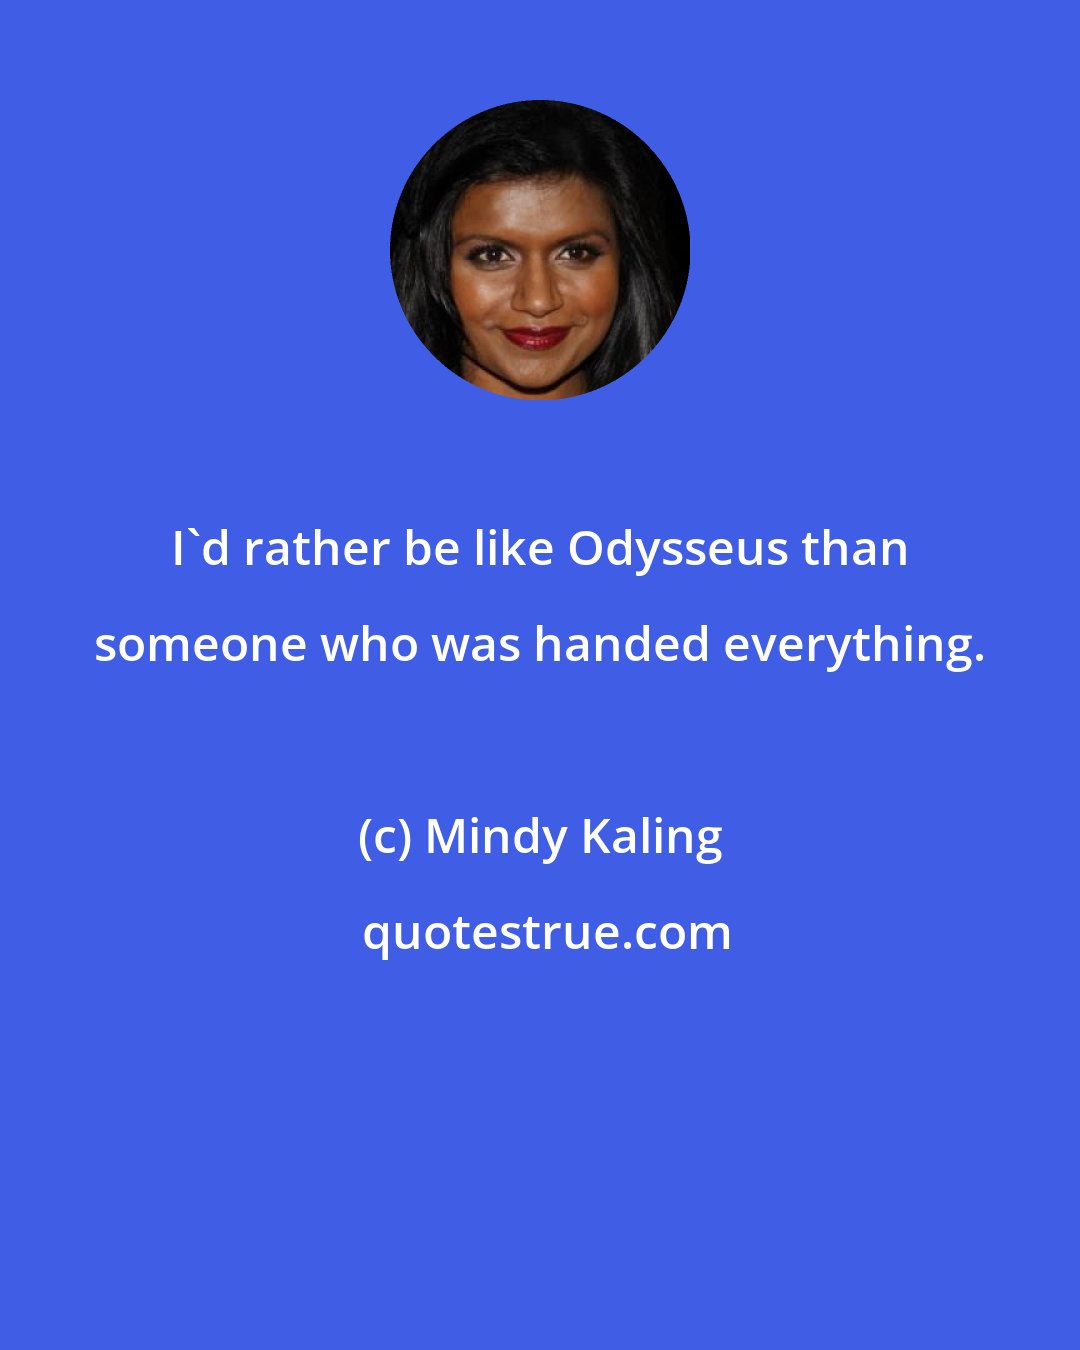 Mindy Kaling: I'd rather be like Odysseus than someone who was handed everything.